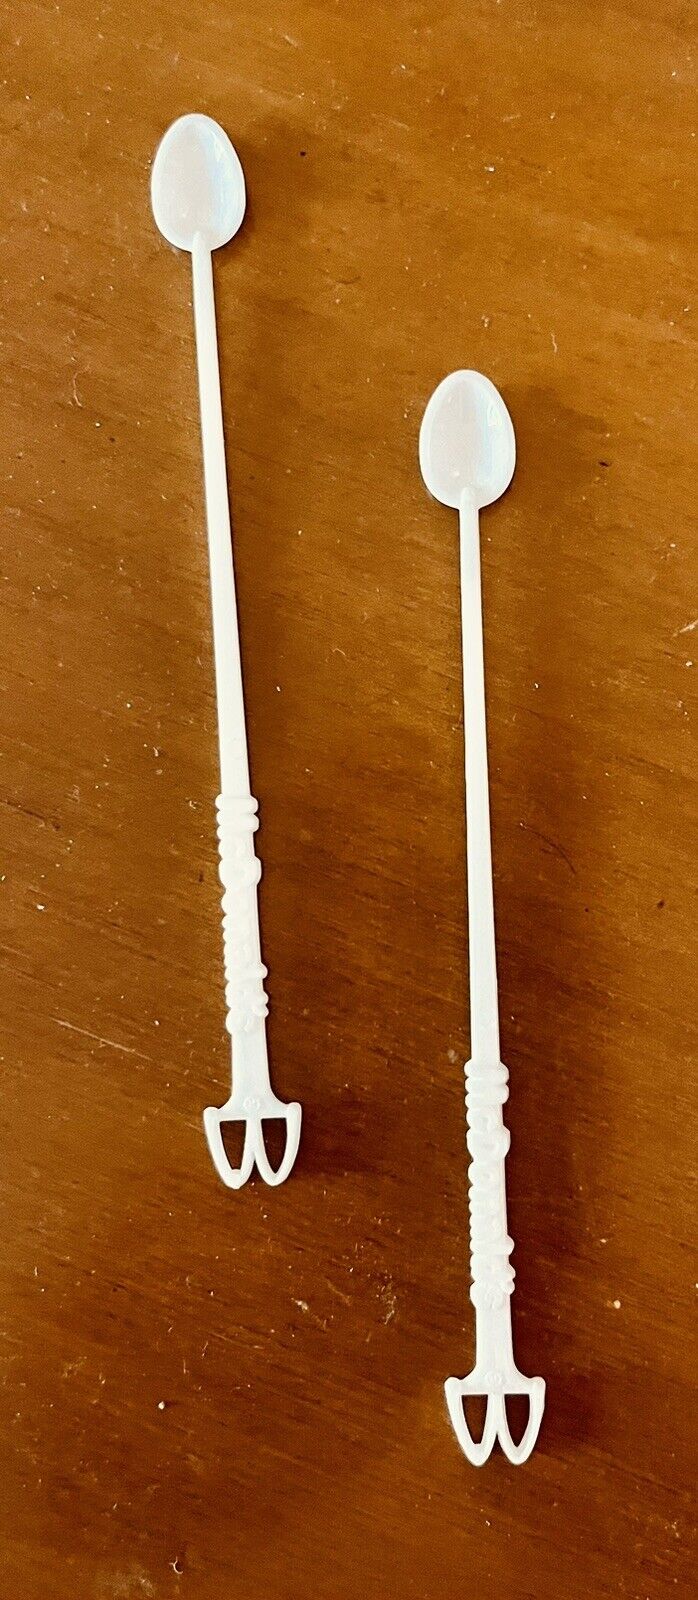 2 Vintage McDonald\'s McSpoon Coffee Spoons, Stirs, Stirrers, Banned